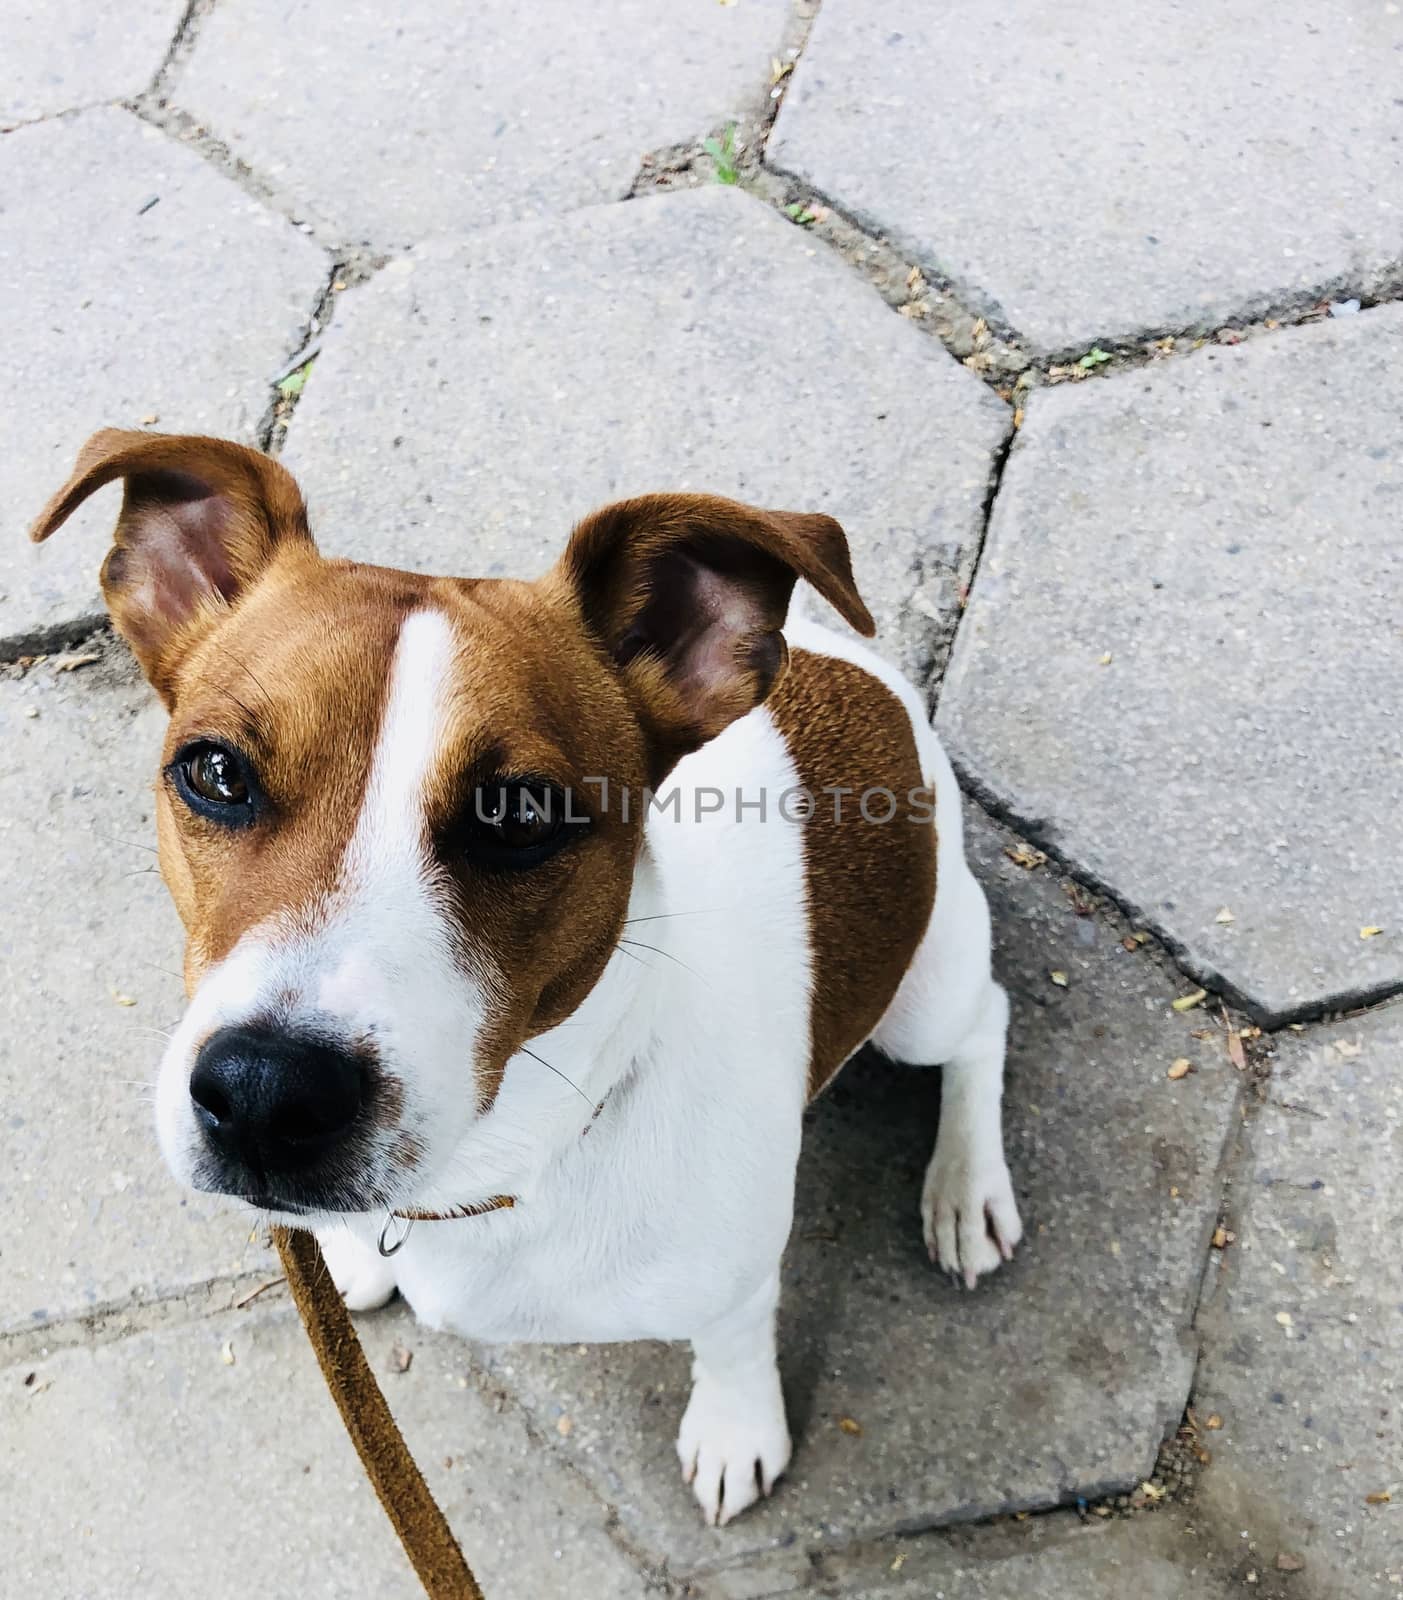 Jack russel dog pet white and brown on a leash feeling bored